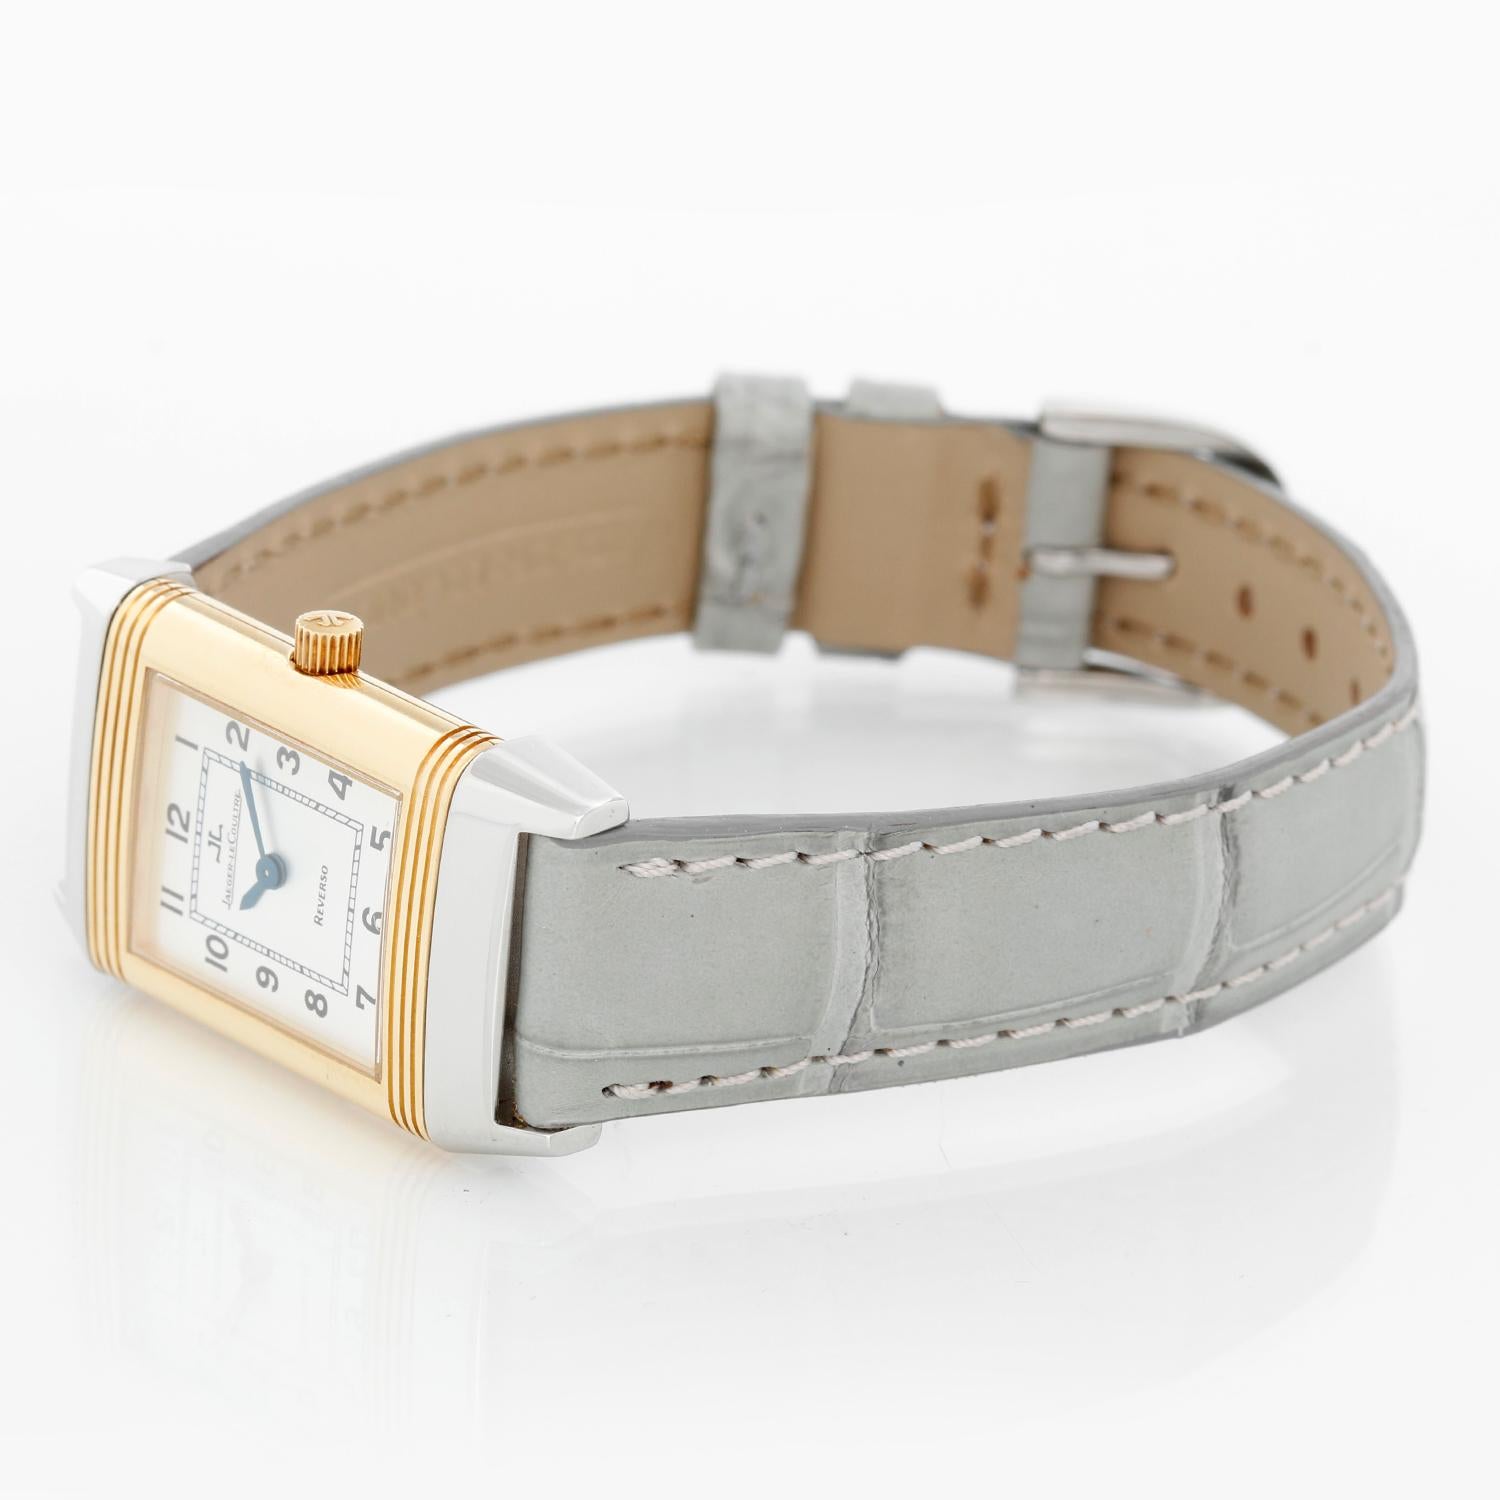 Jaeger LeCoultre Reverso 260.5.08 Stainless Steel and Yellow Gold Watch - Quartz. Stainless steel and Yellow Gold  ( 20mm x 32mm ). Silver dial with Arabic roman numerals and subdial at 6 o'clock.  JLC Light Spring Green strap with JLC signed